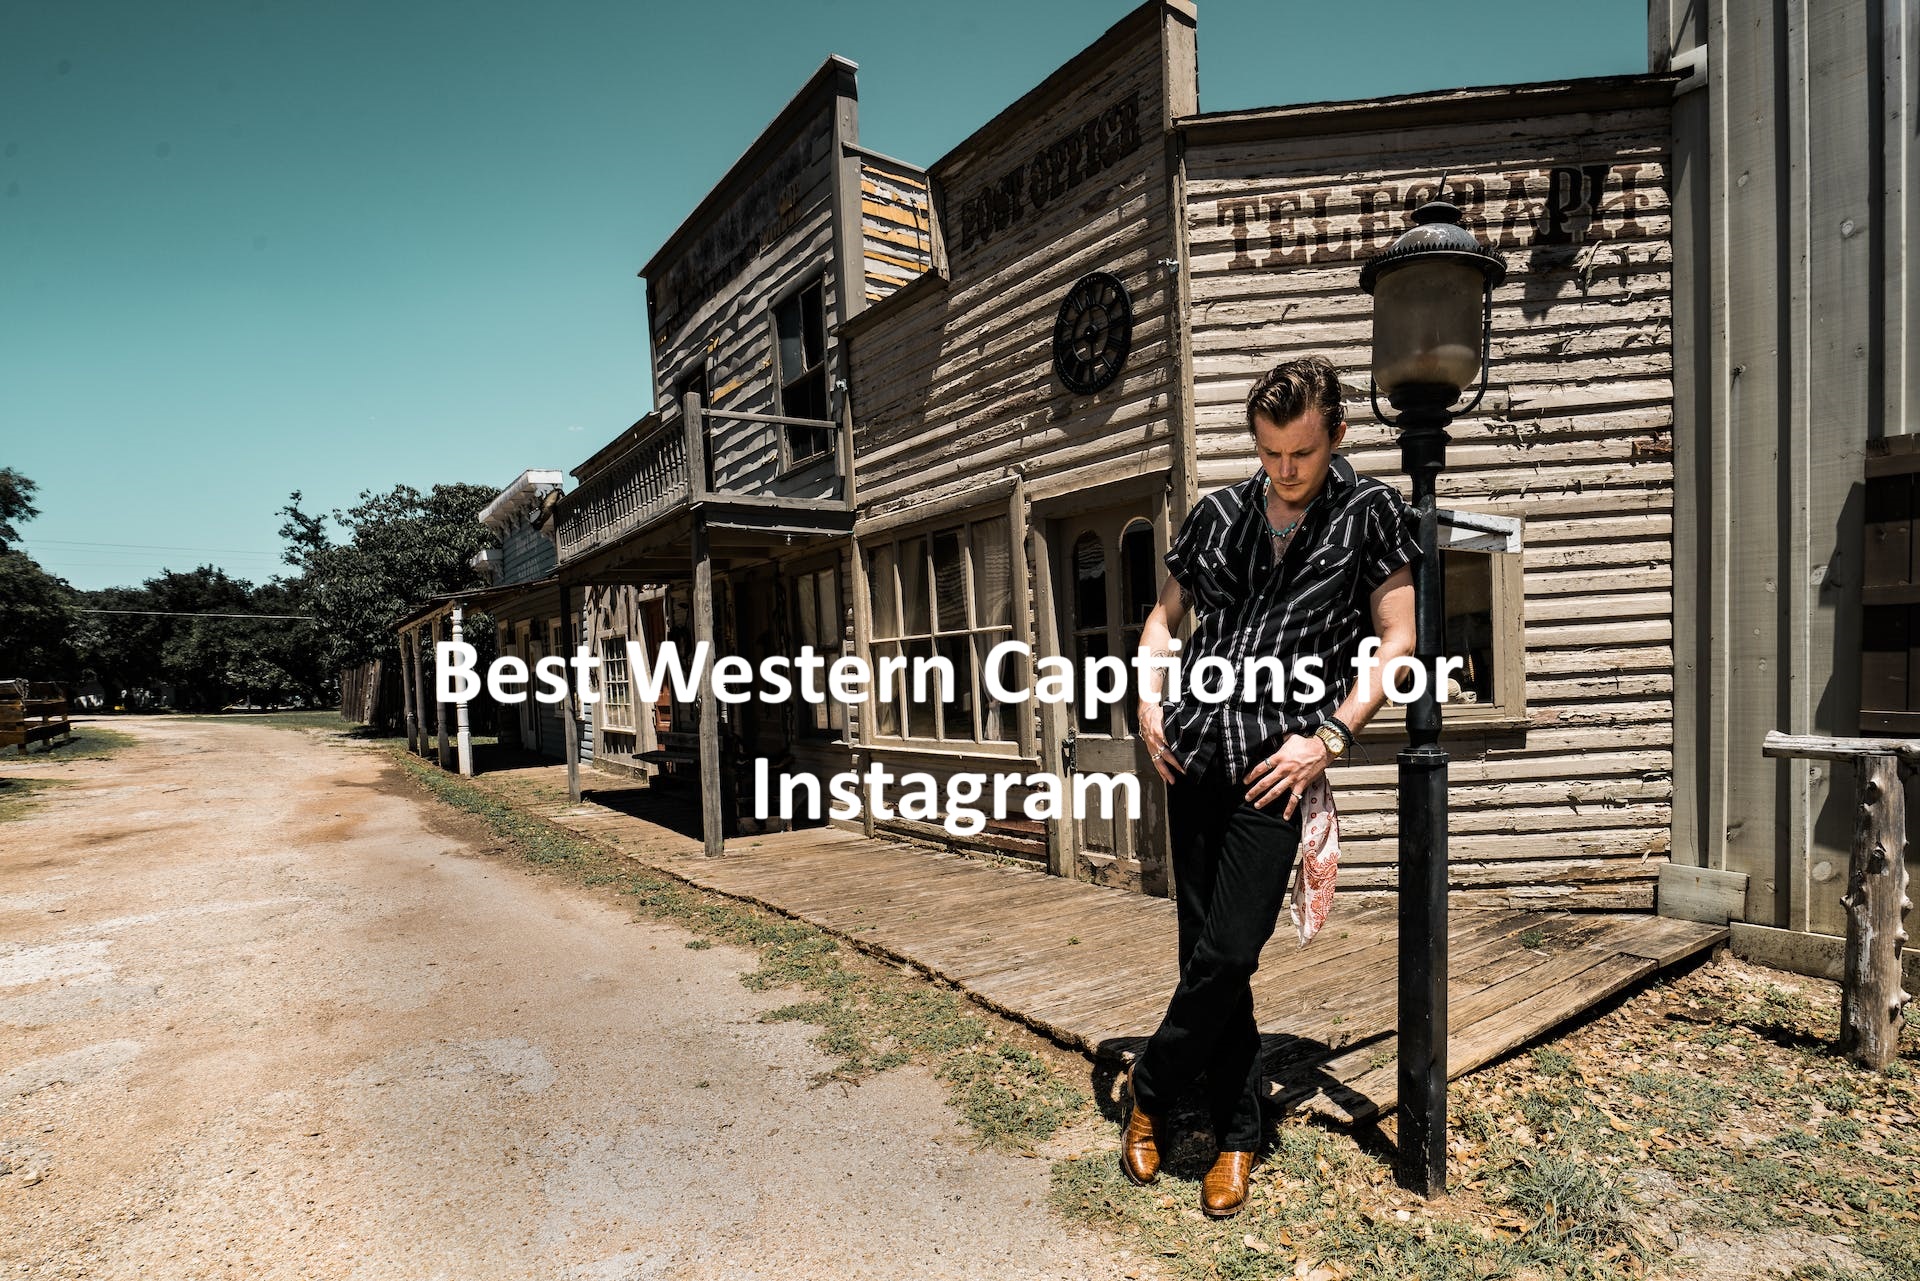 Western Captions for Instagram